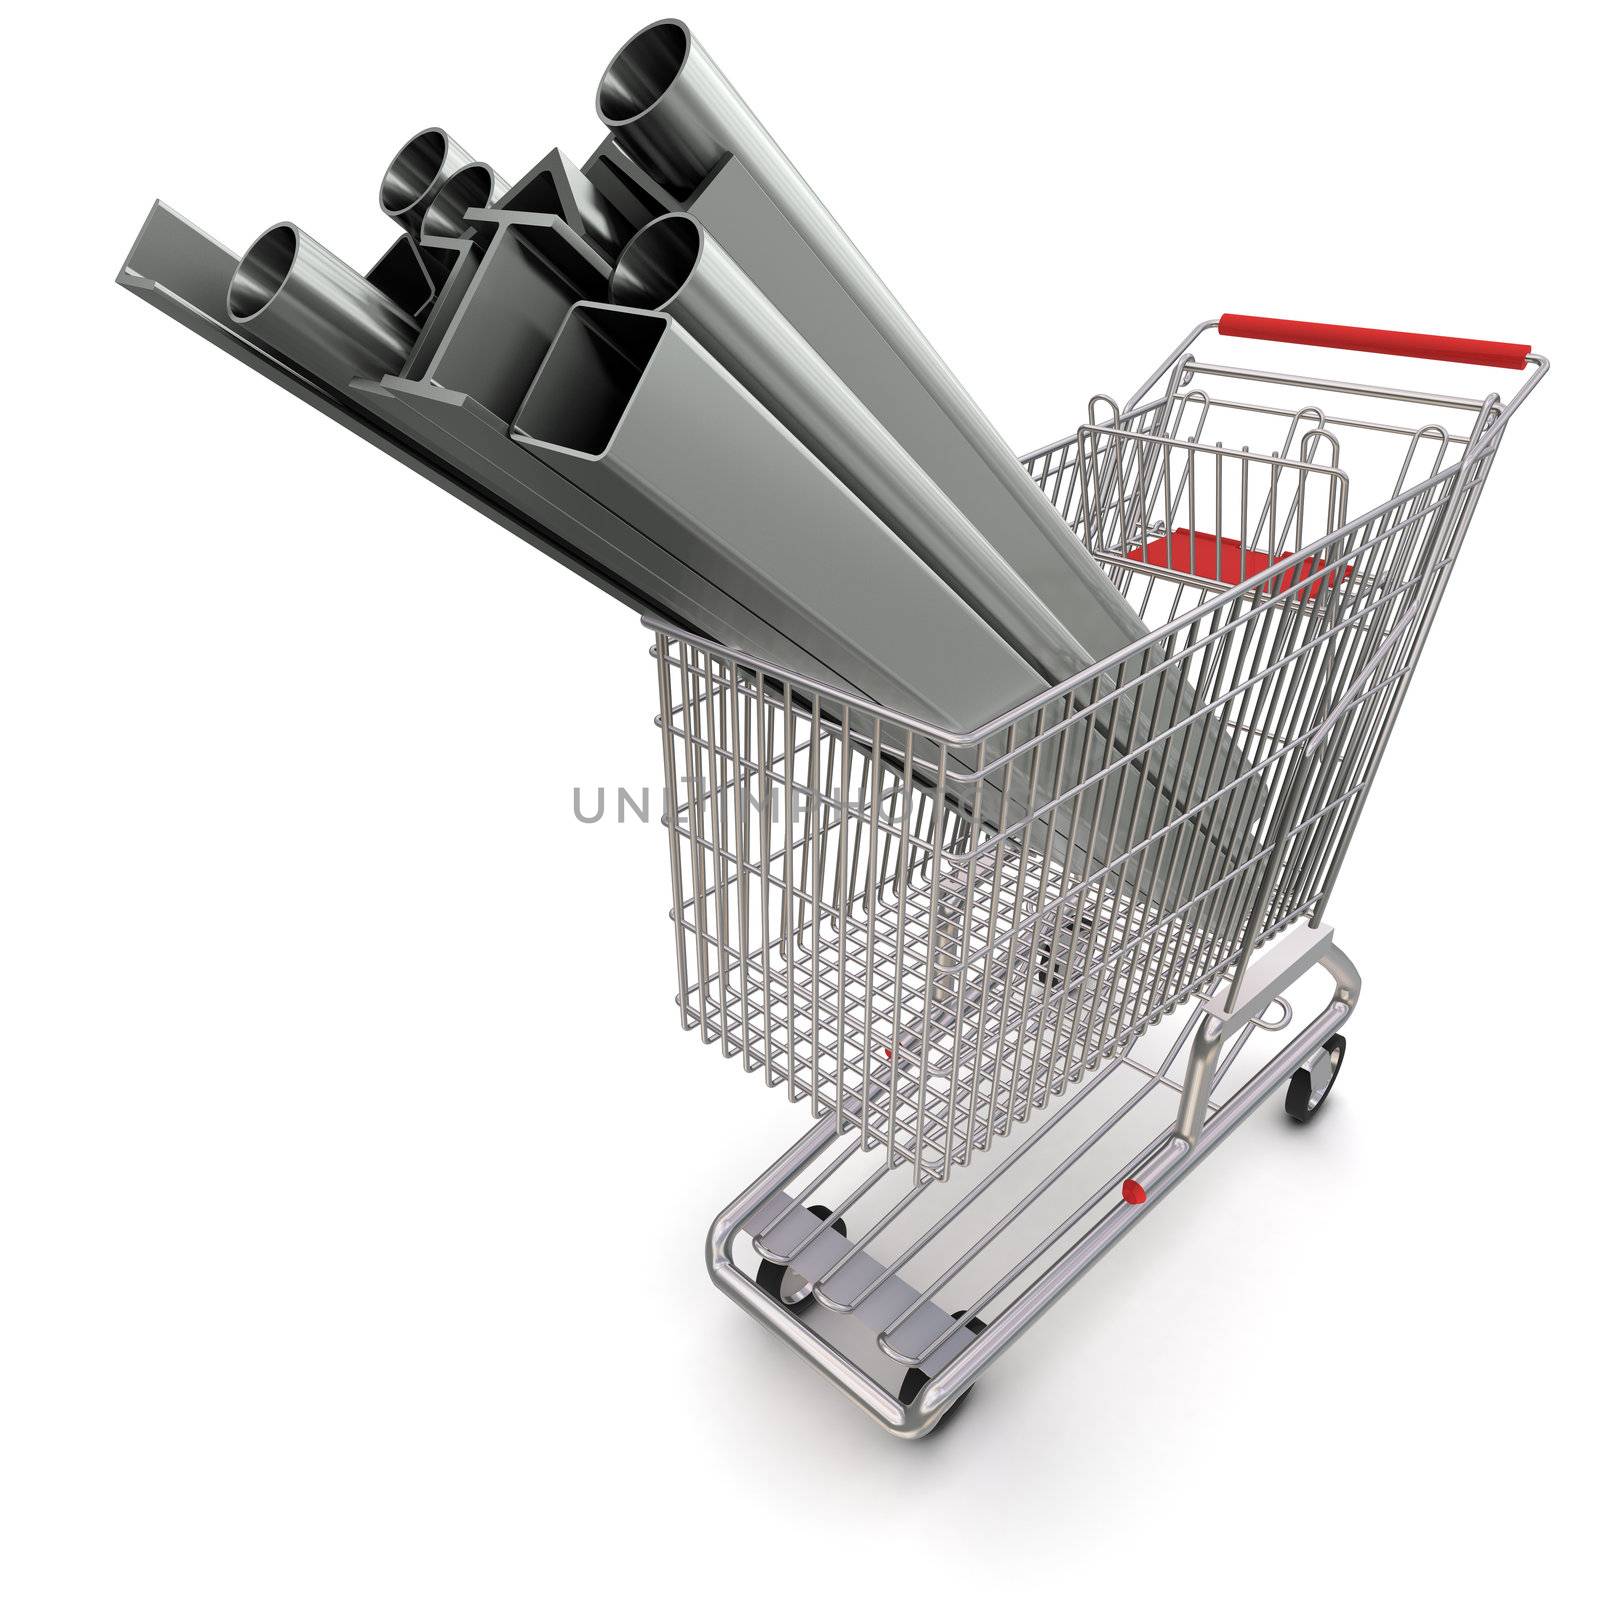 Metal in your shopping cart